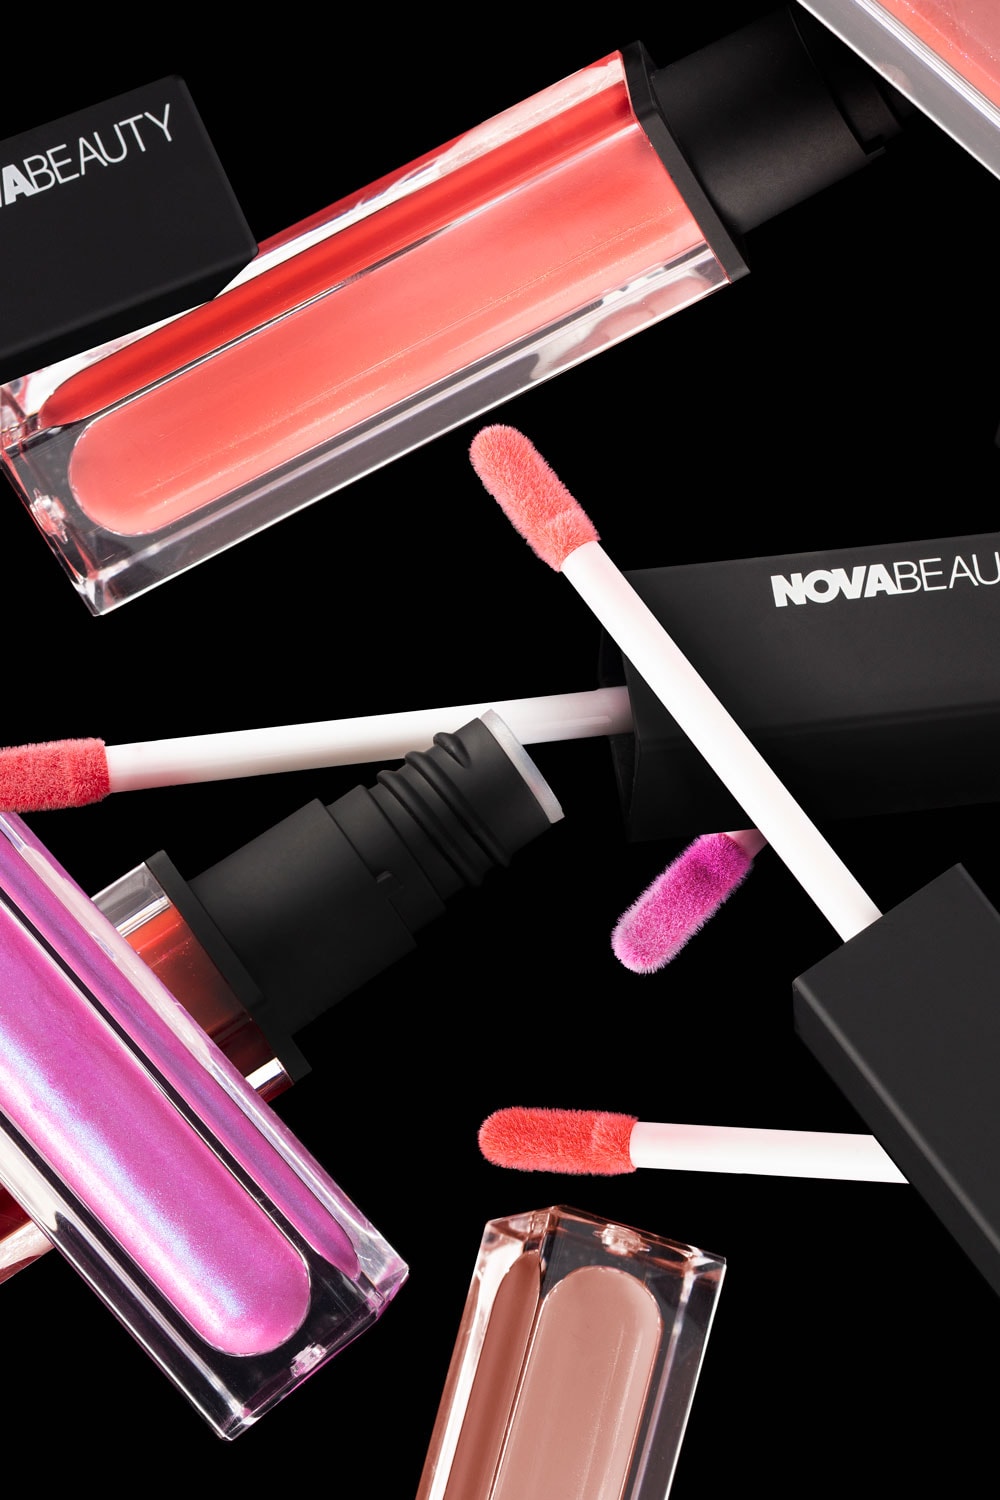 fashion nova novabeauty lip collection new release cosmetics three products the perfect pout lipstick 2-in-1 snatched lip liner moisturizing rich glow gloss nude shades